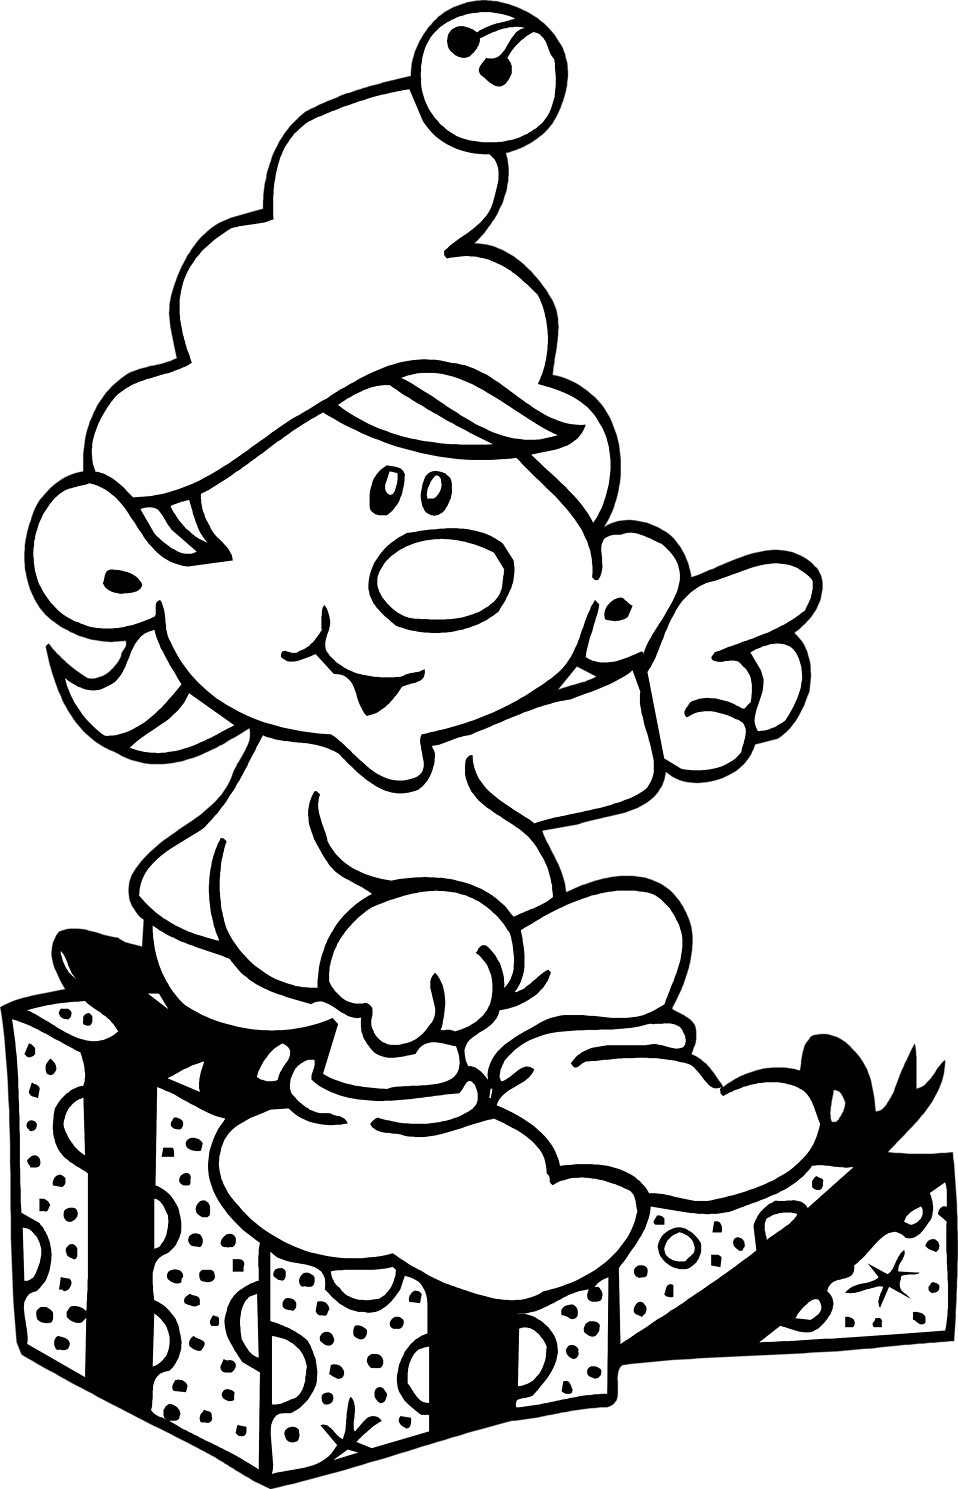 Elf  black and white elf free a christmas elf sitting clipart